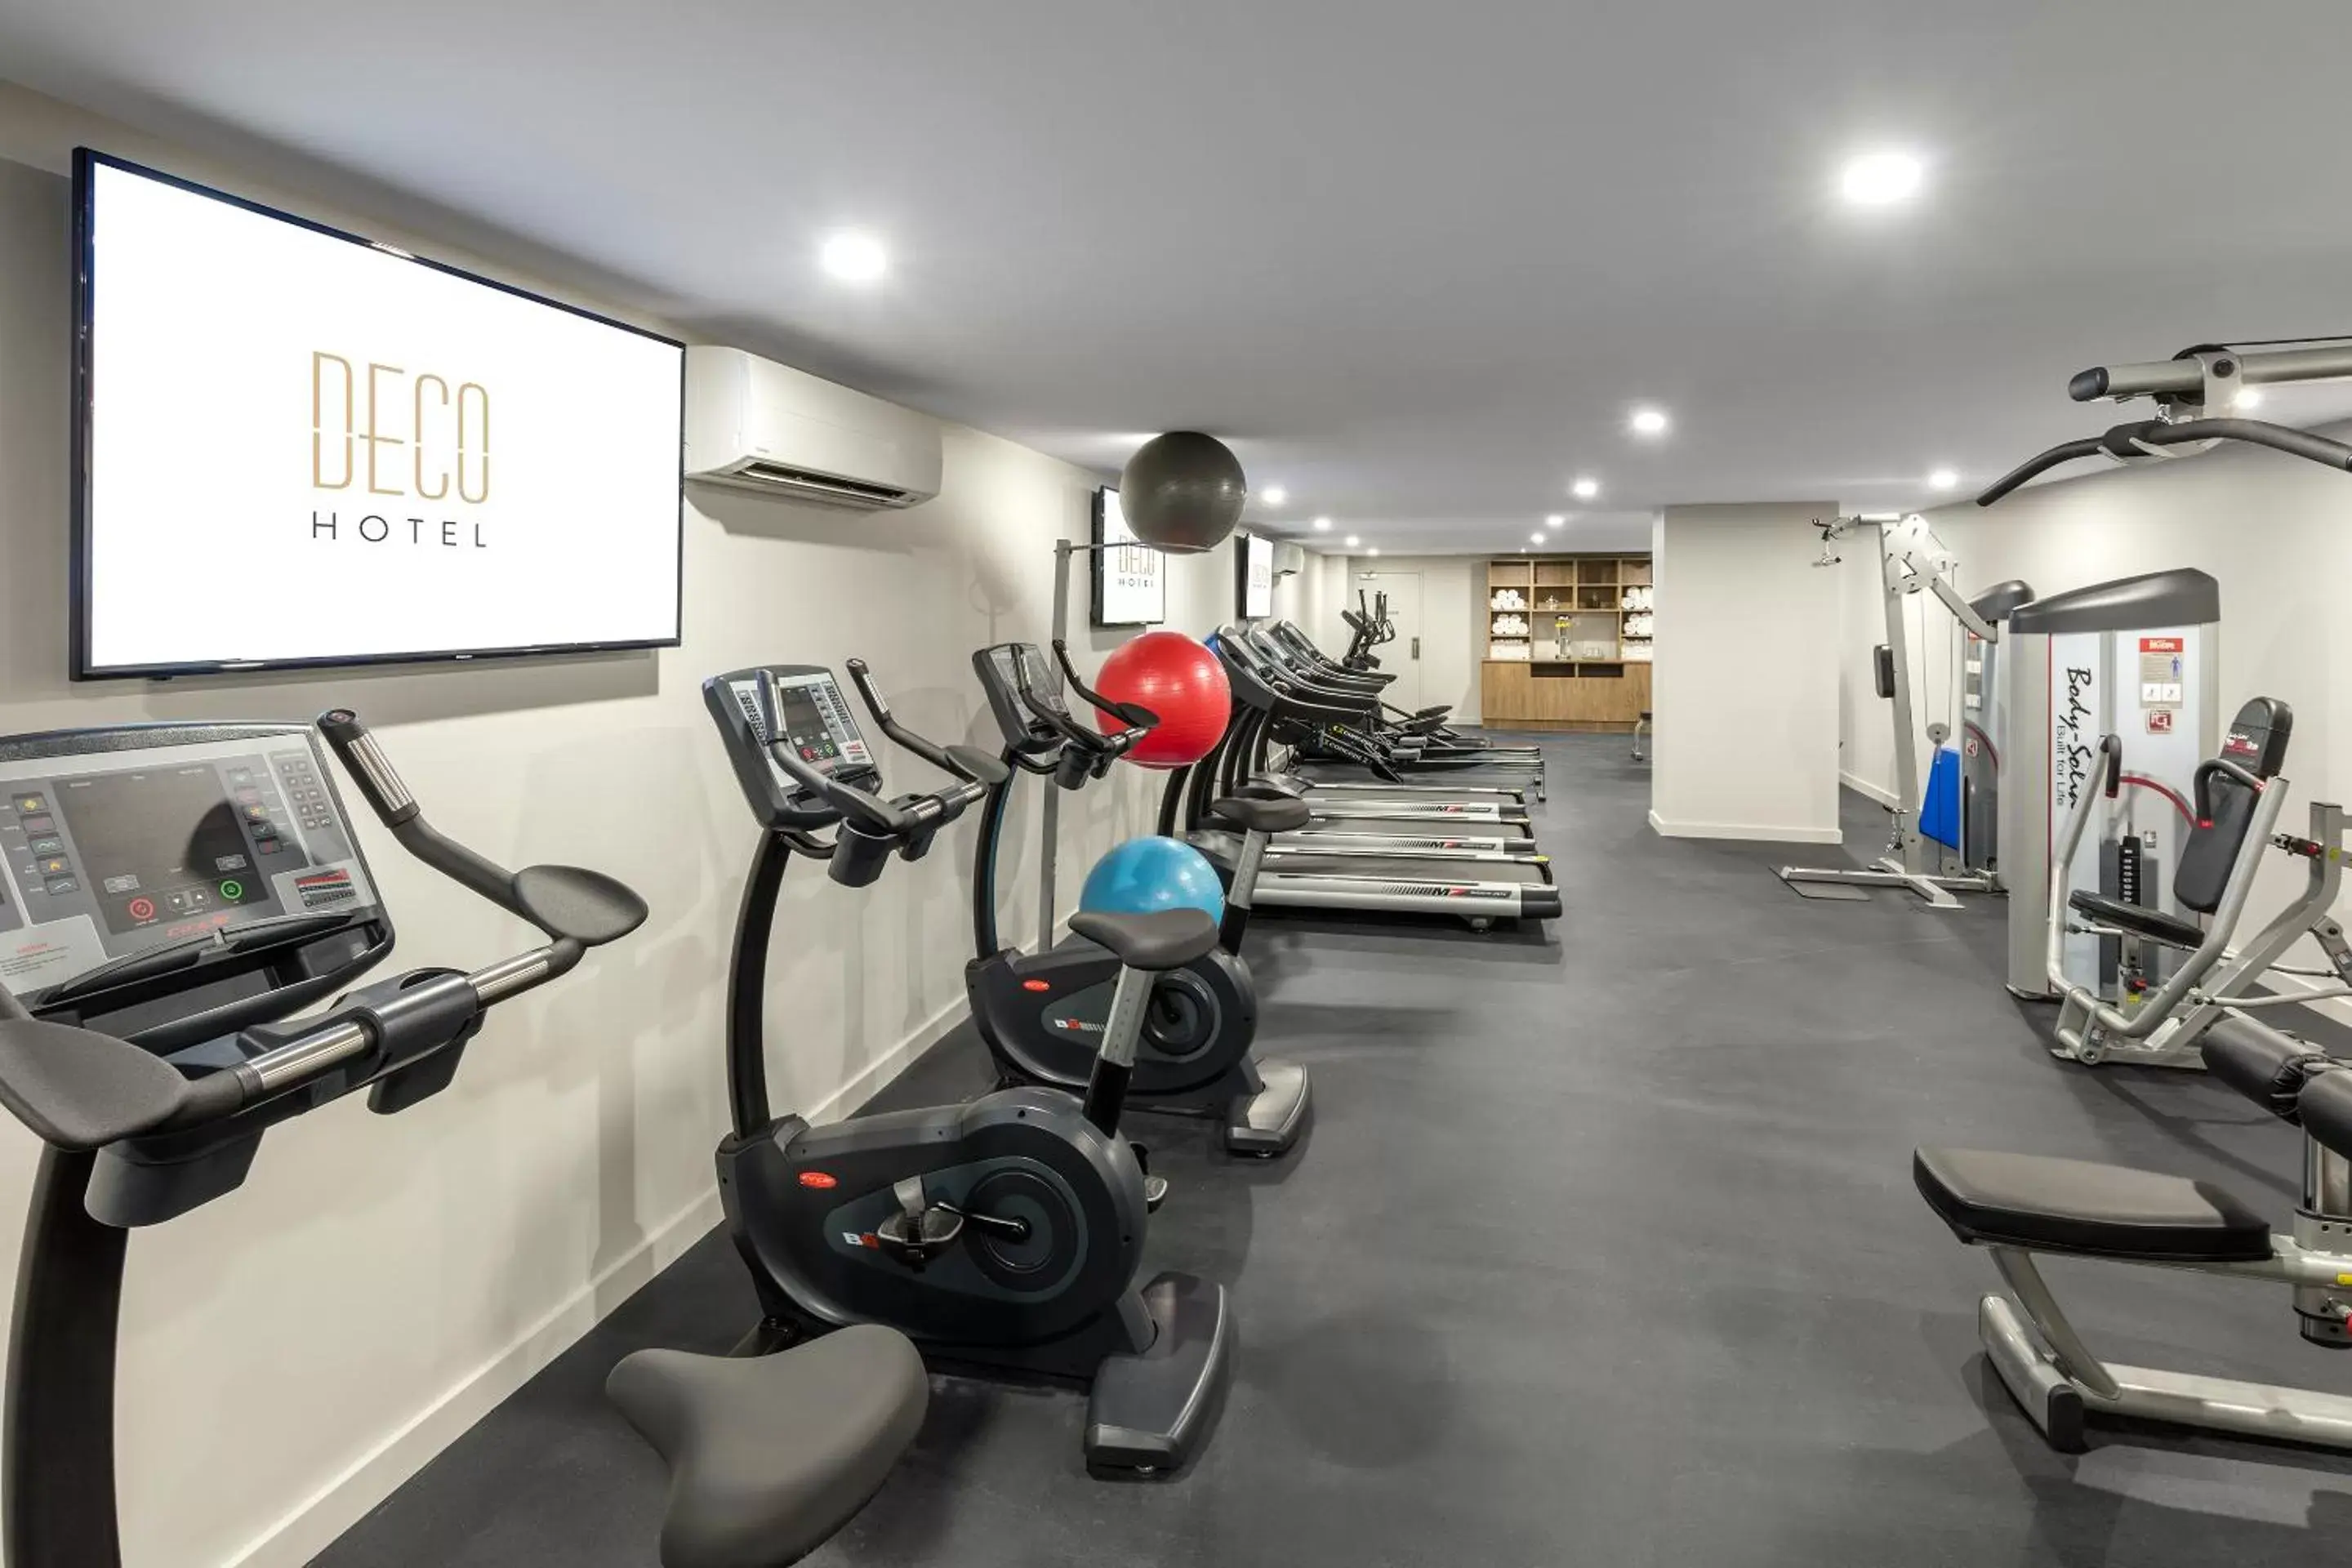 Fitness centre/facilities, Fitness Center/Facilities in Deco Hotel Canberra